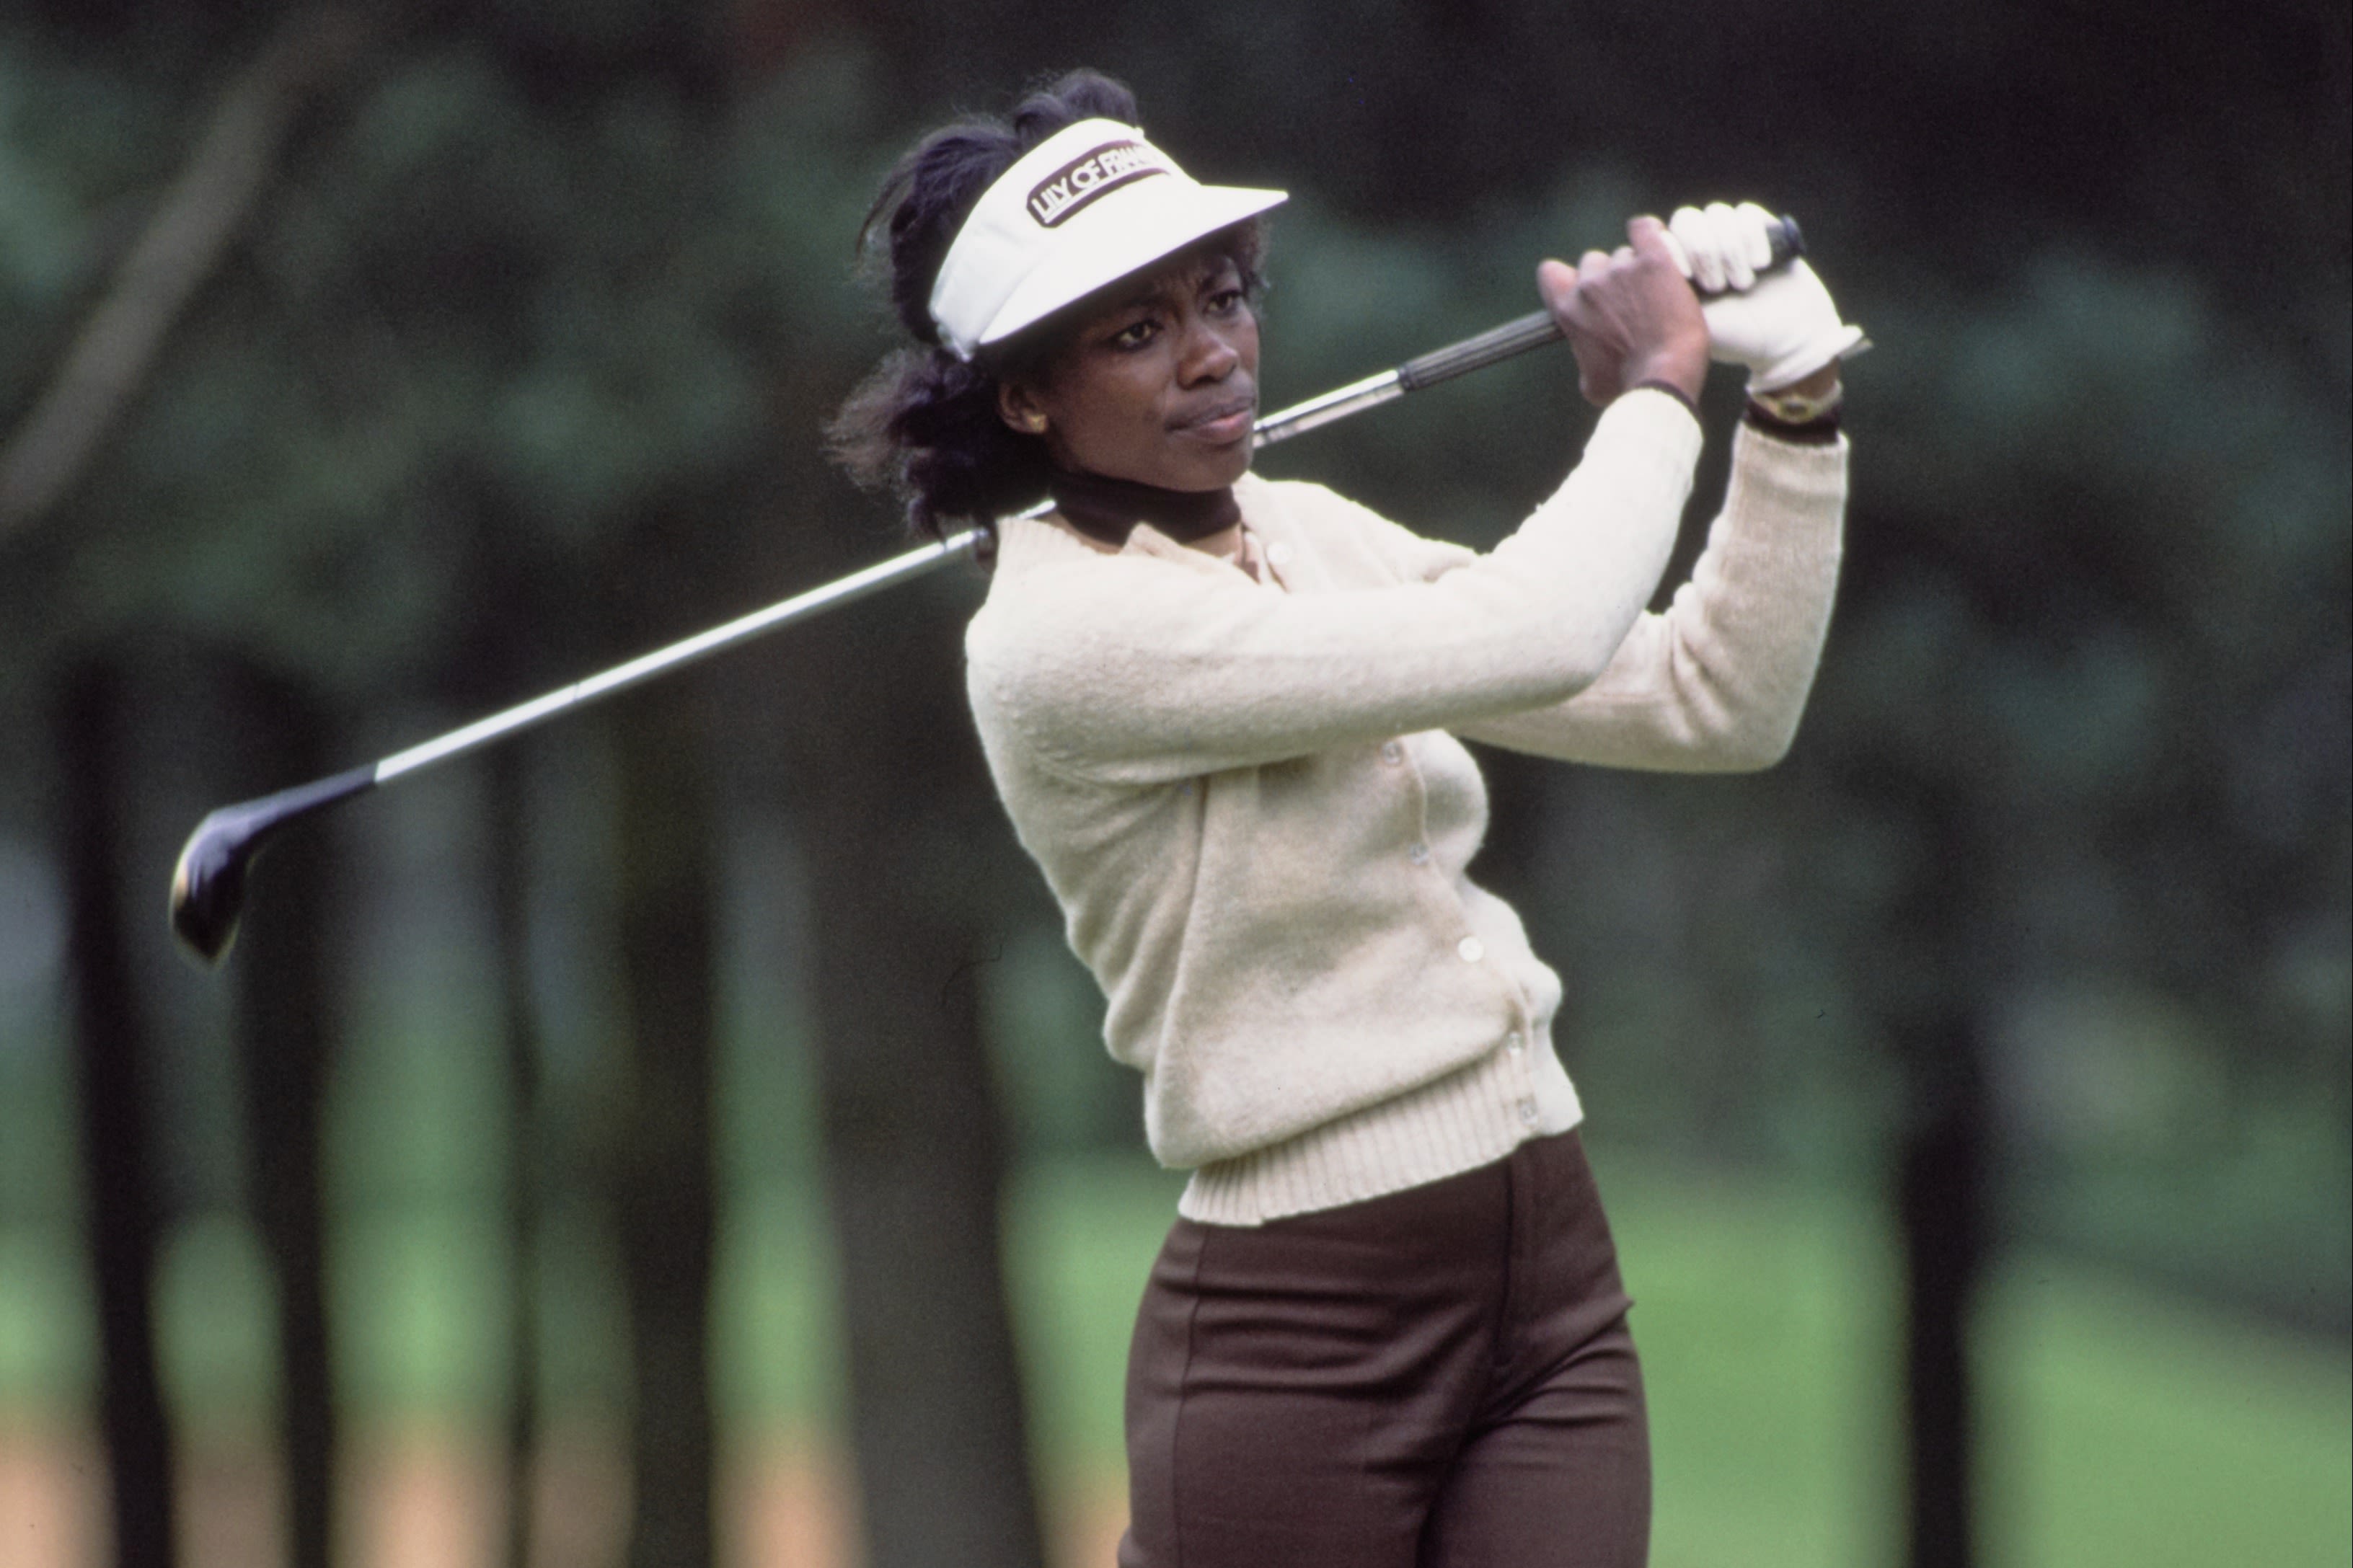 Renee Powell was the first Black woman to play on the LPGA Tour.